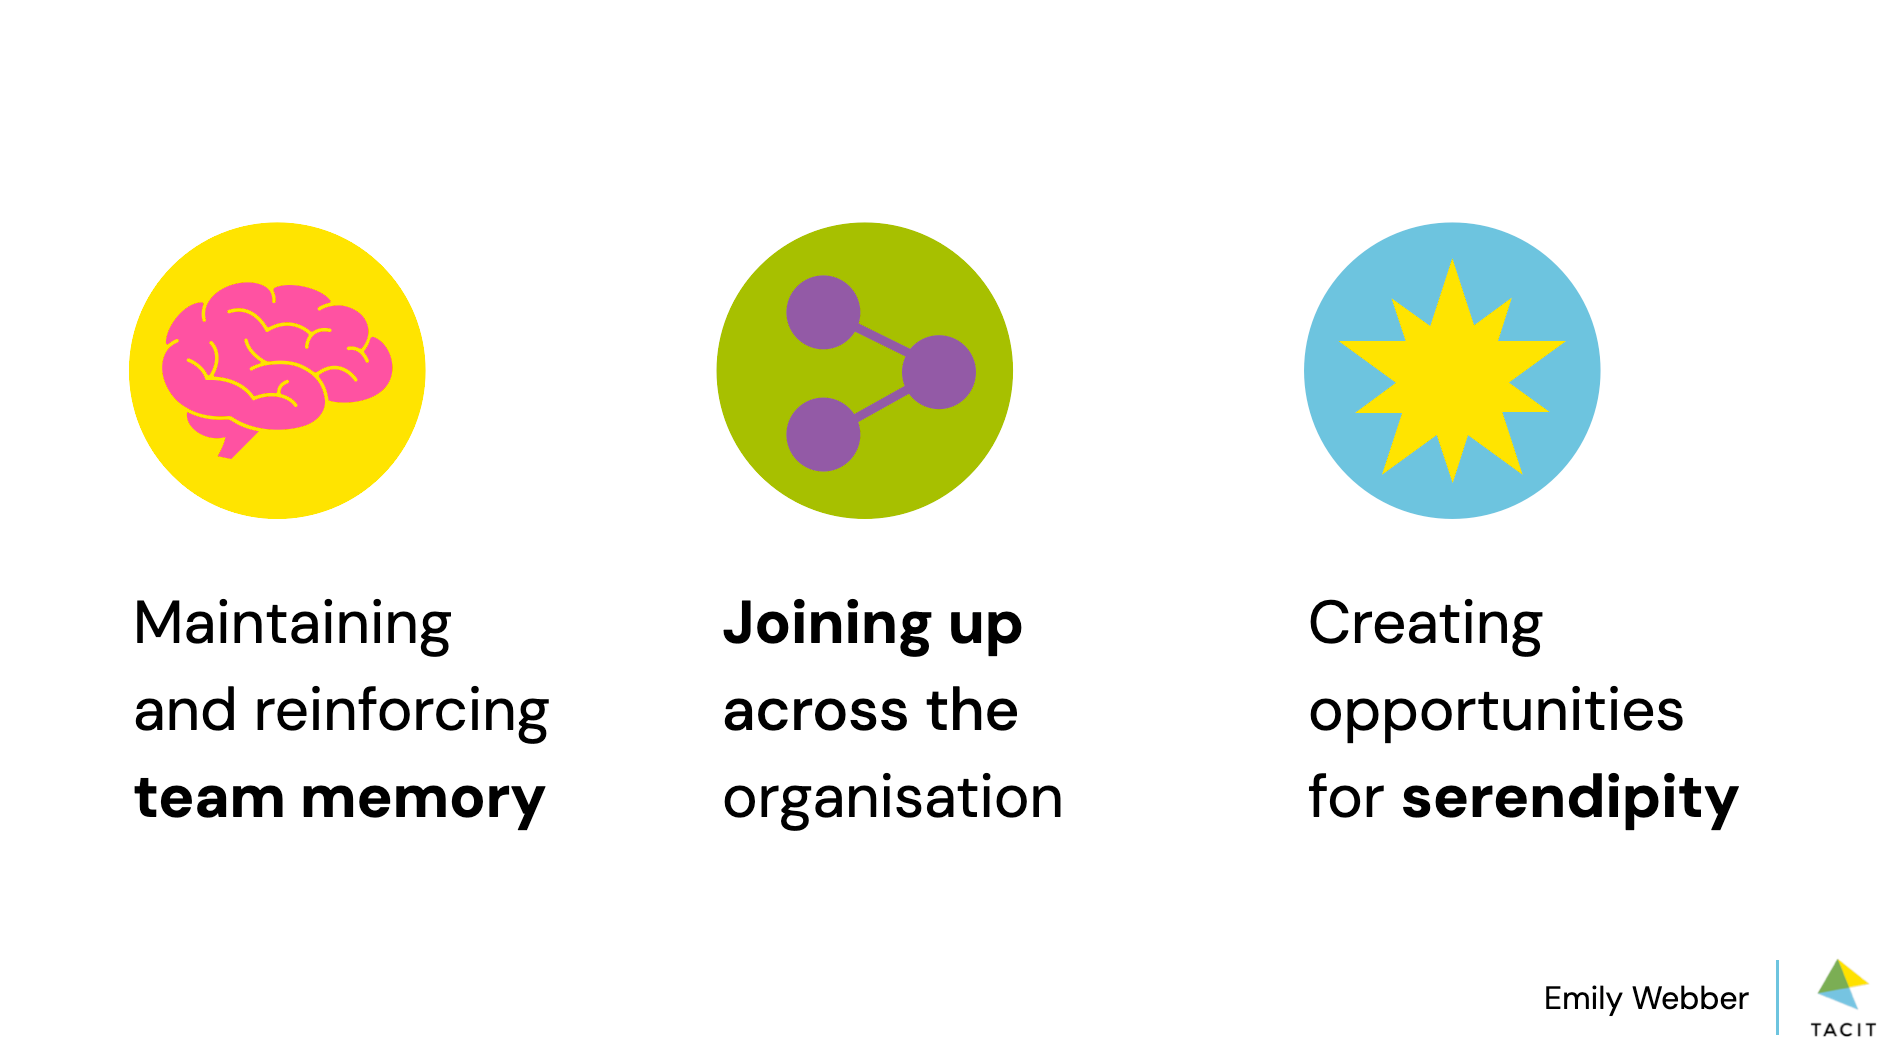 Slide from presentation. We see three icons, each with an associated phrase. The phrases read as follows: “(1) Maintaining and reinforcing team memory, (2) Joining up across the organization, and (3) Creating opportunities for serendipity.”